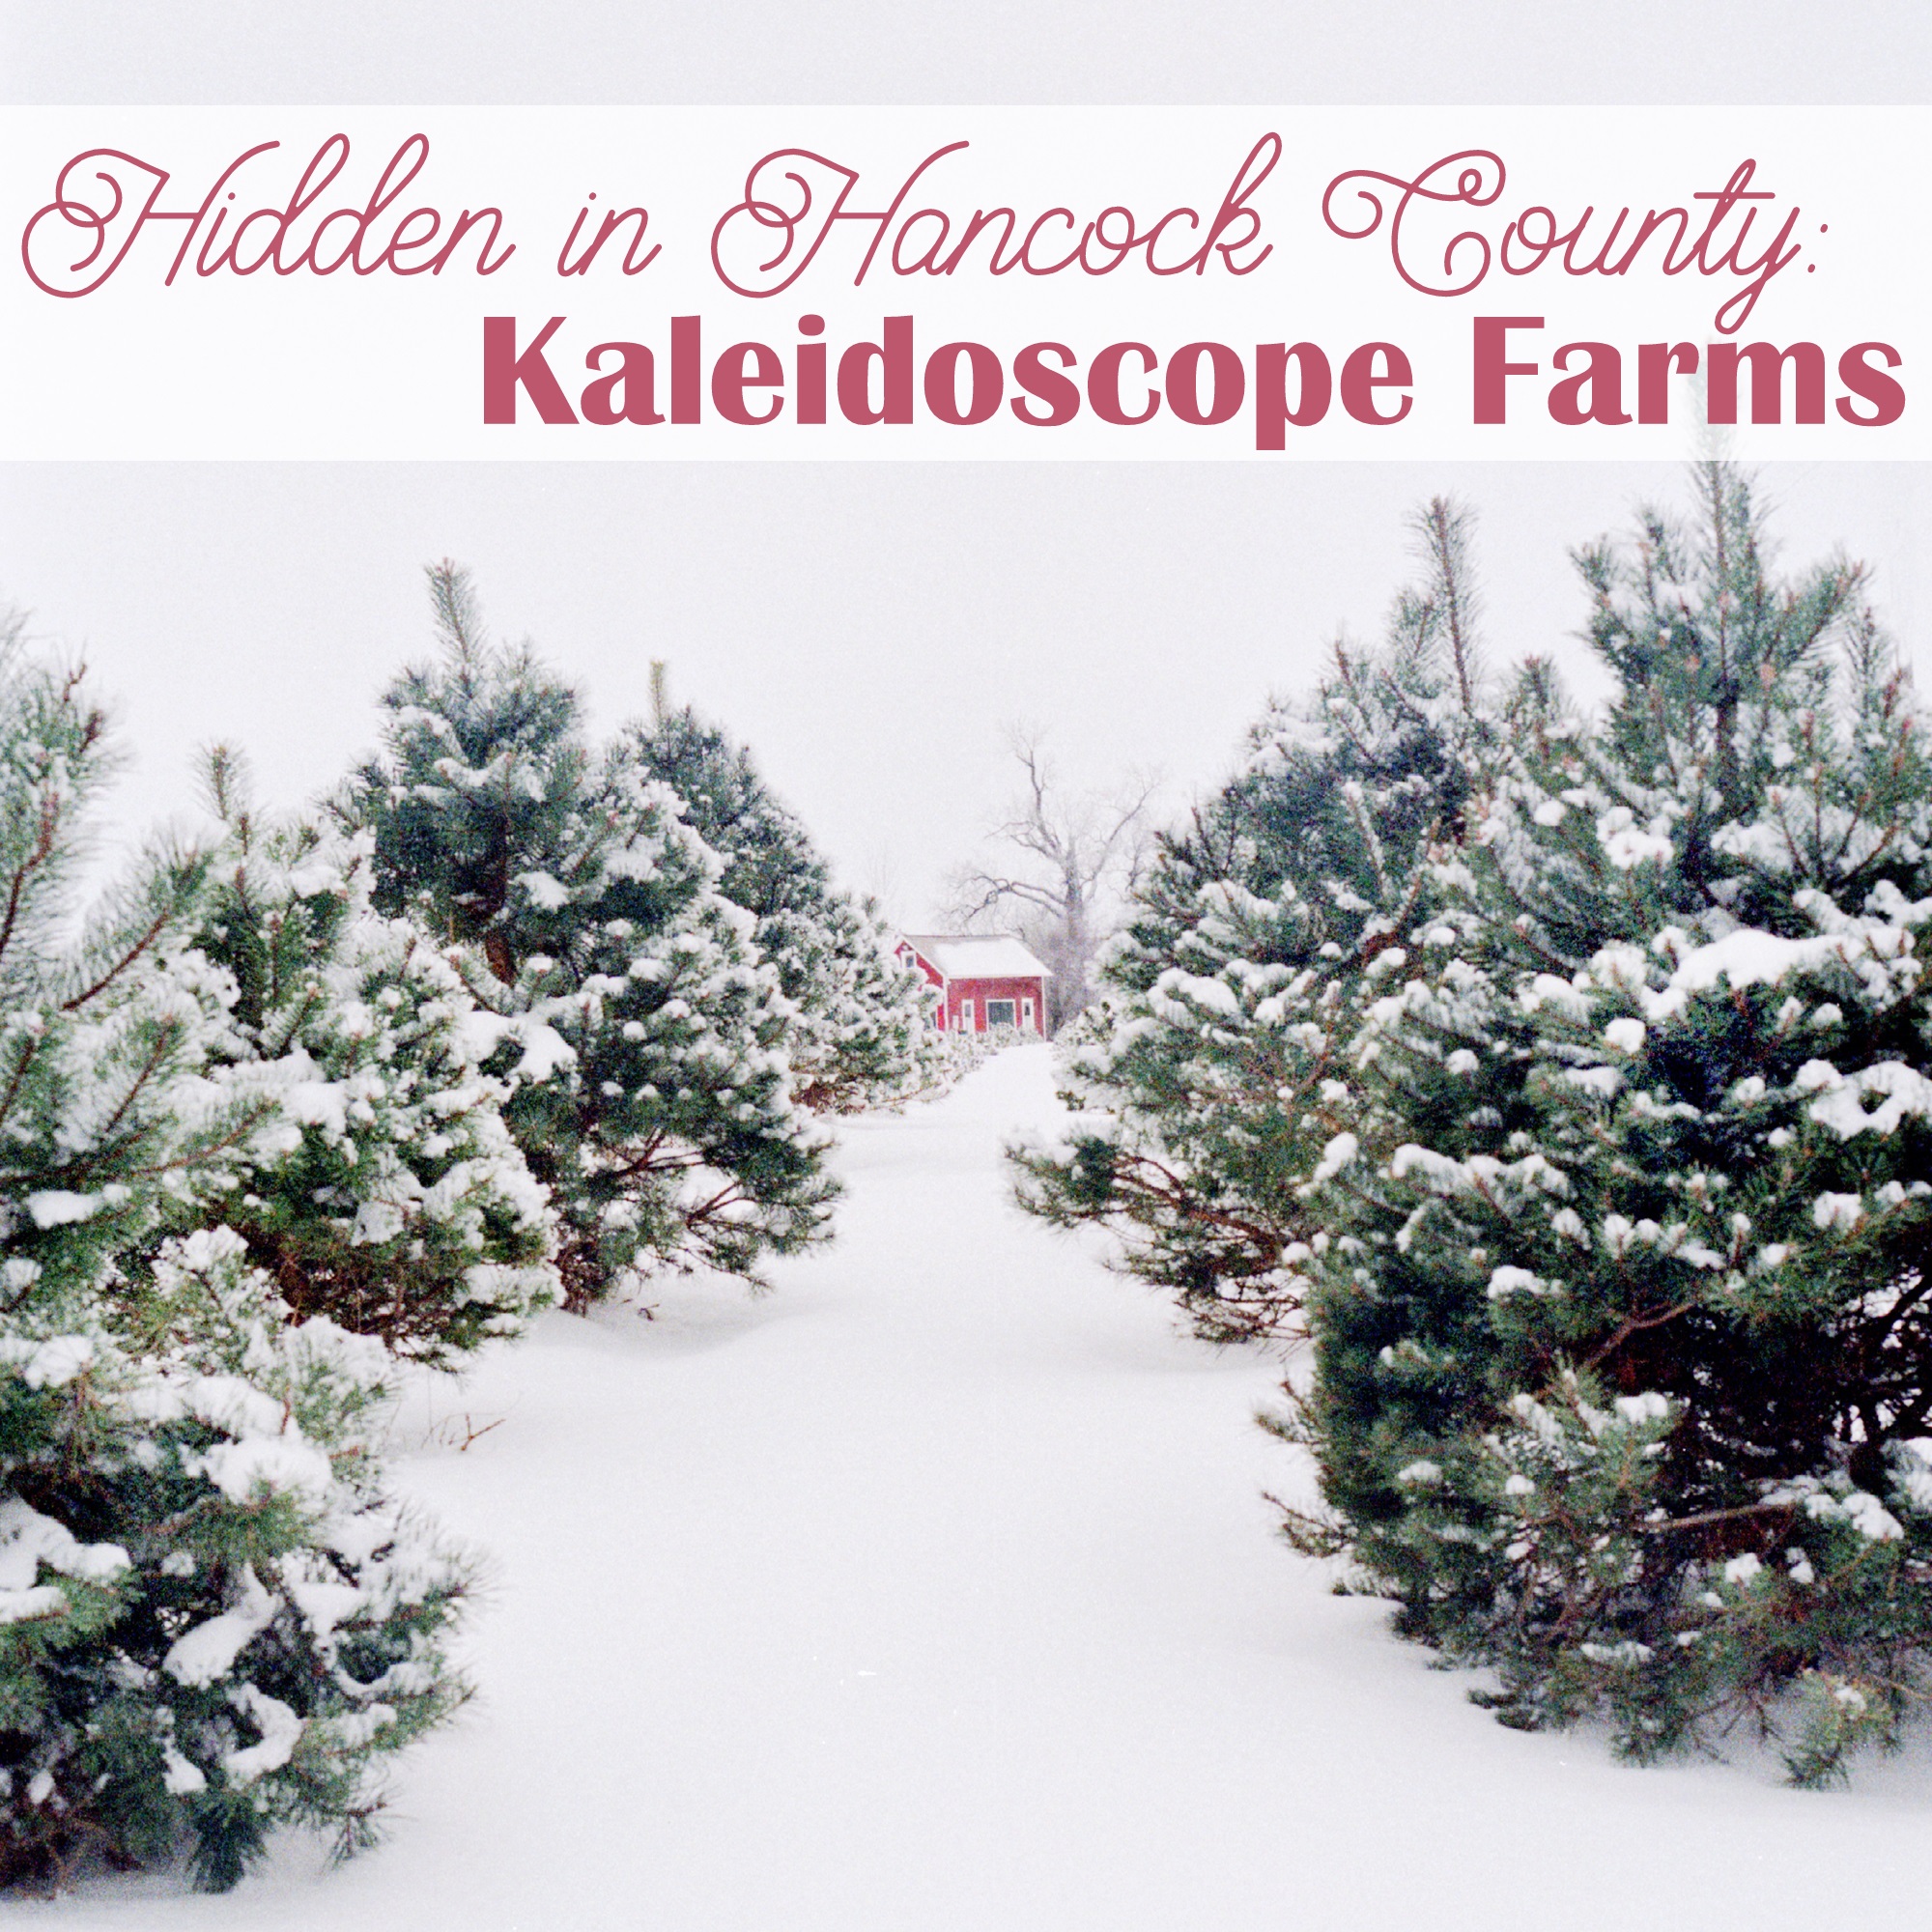 Hancock County is home to many great treasures and this month we are featuring the trees, gift shop, and more at Kaleidoscope Farms! • VisitFindlay.com